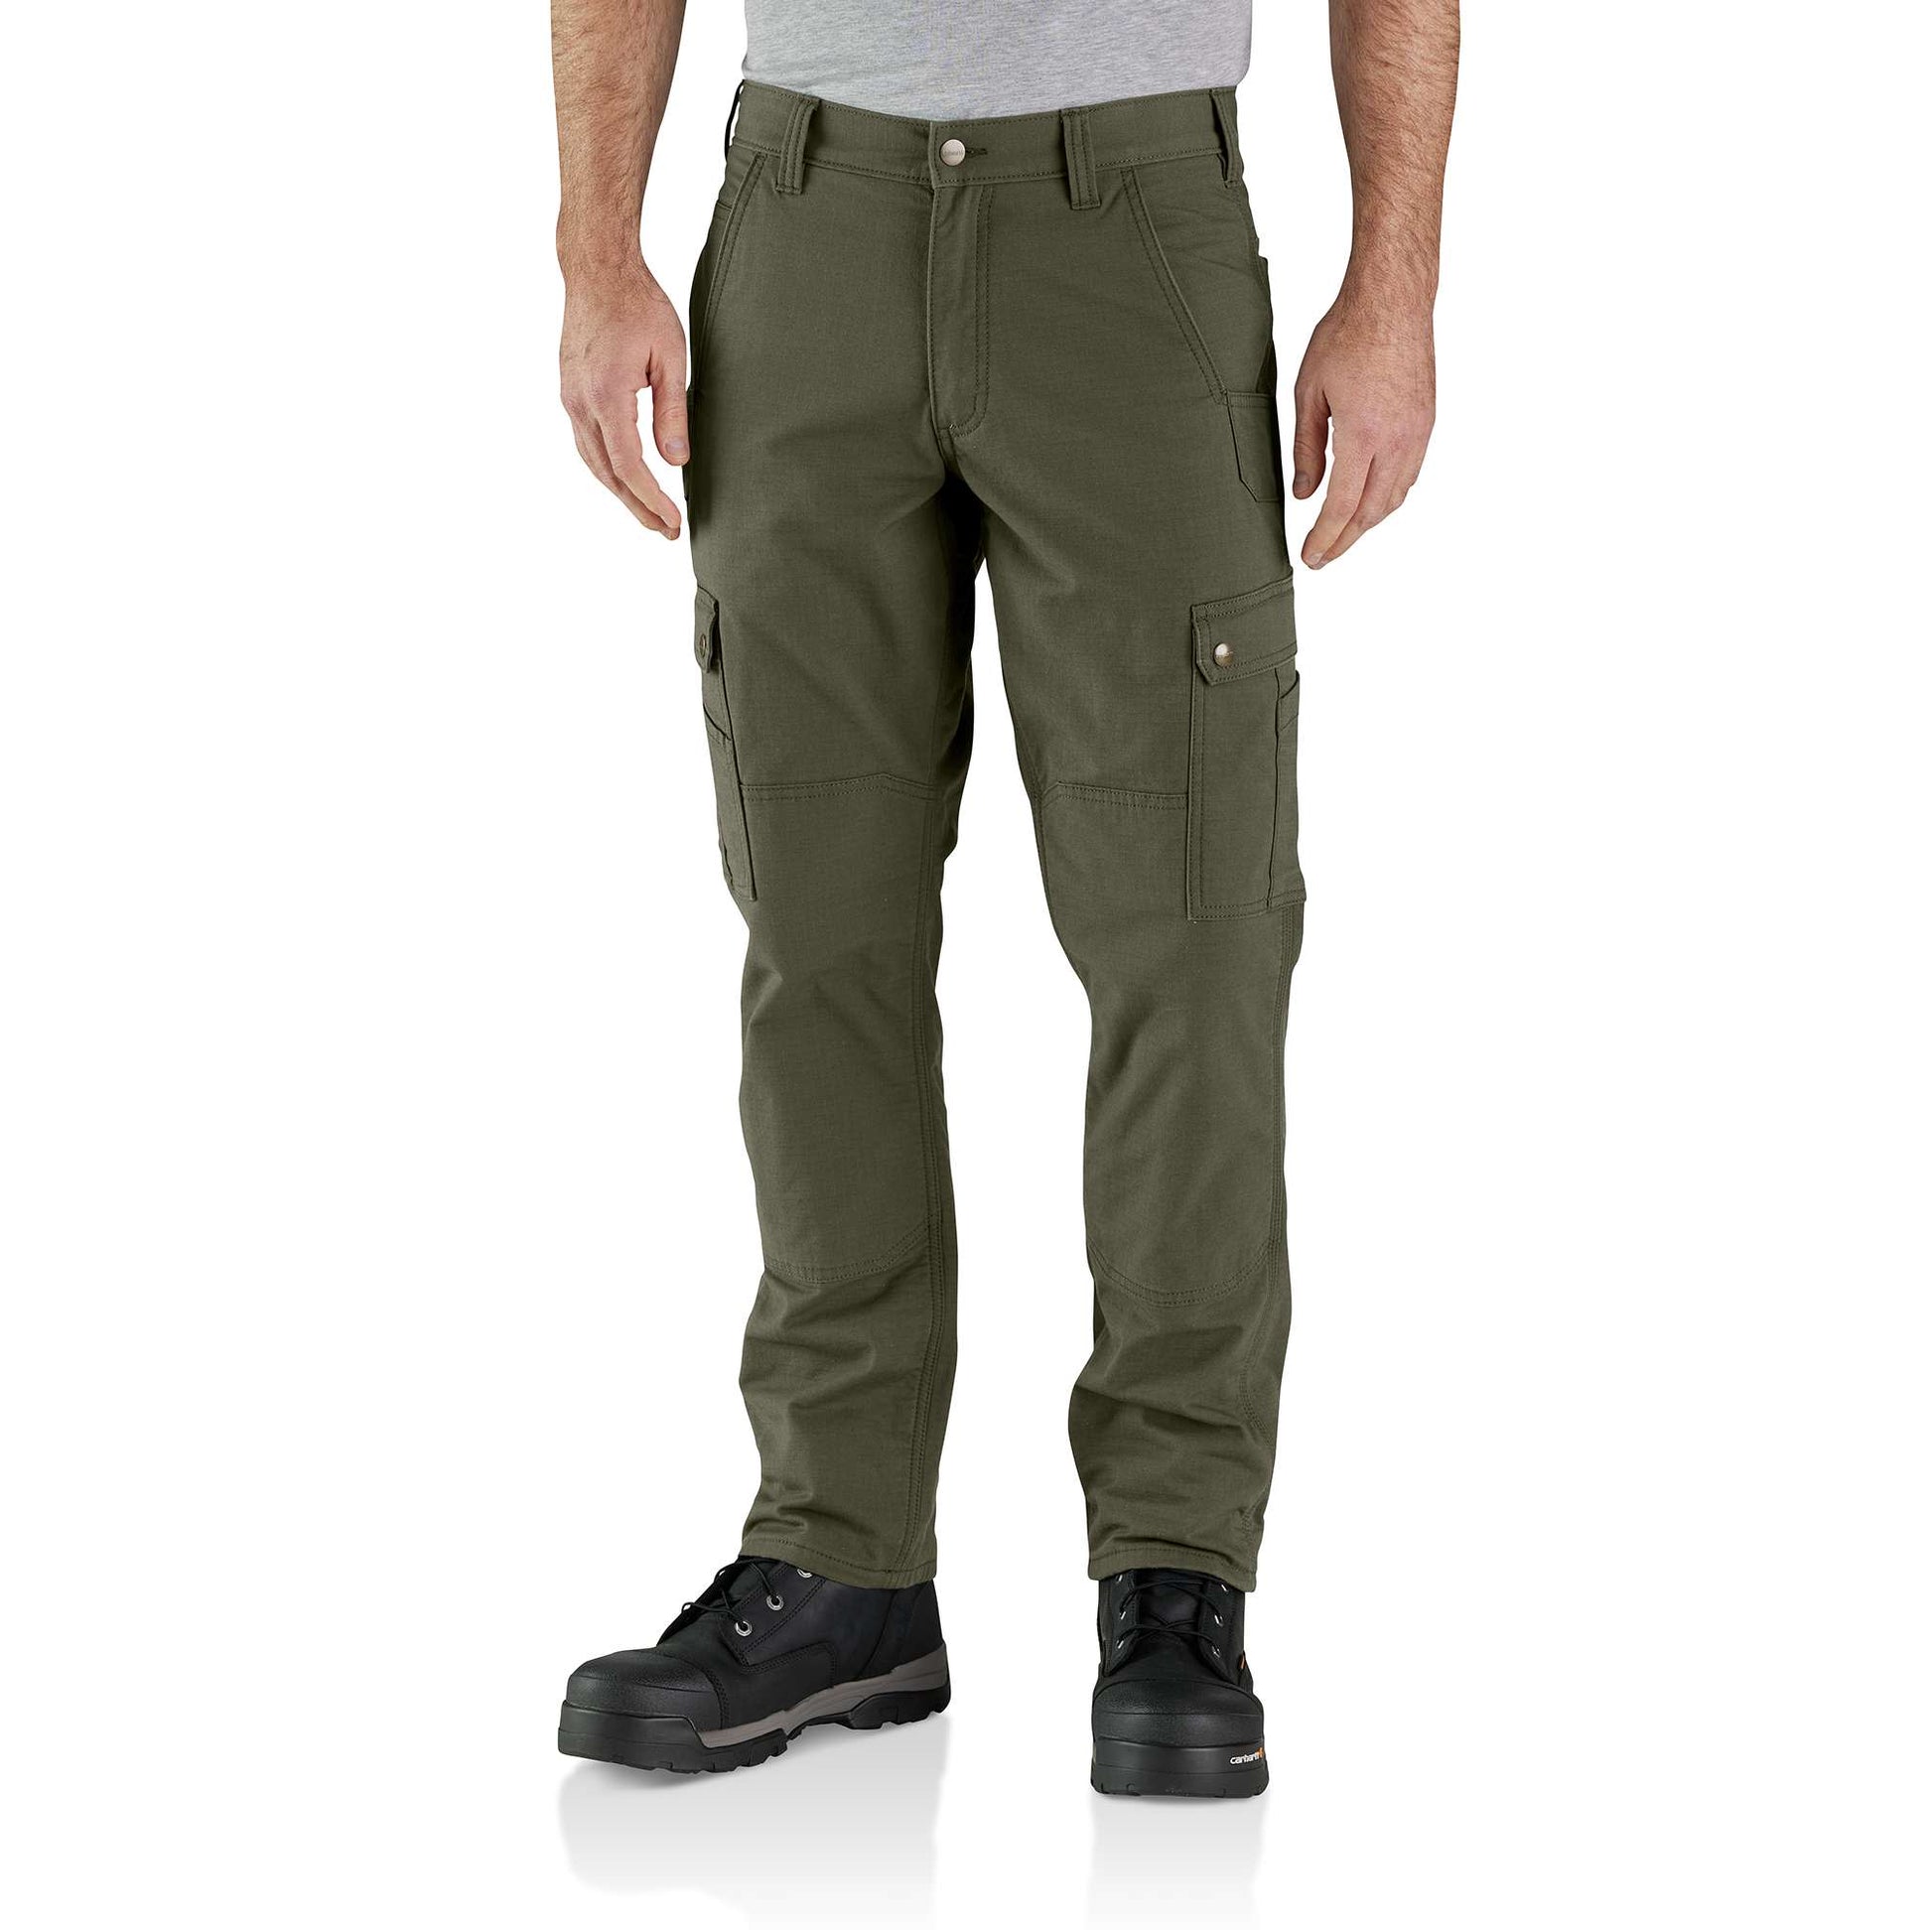 Buy Polar Fleece Lined Cargo Pant Men's Jeans & Pants from Buyers Picks.  Find Buyers Picks fashion & more at